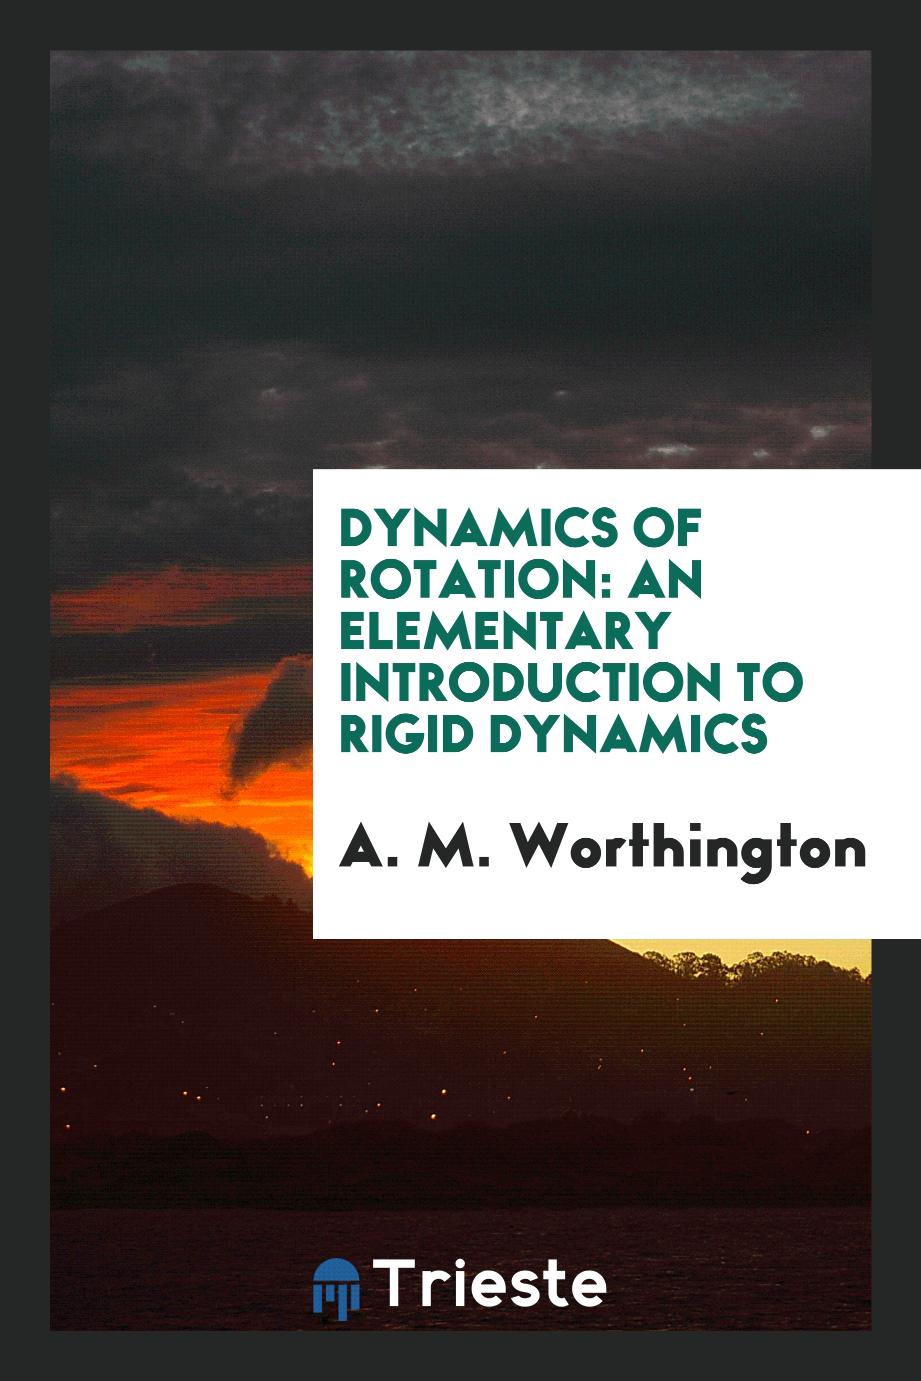 Dynamics of rotation: an elementary introduction to rigid dynamics